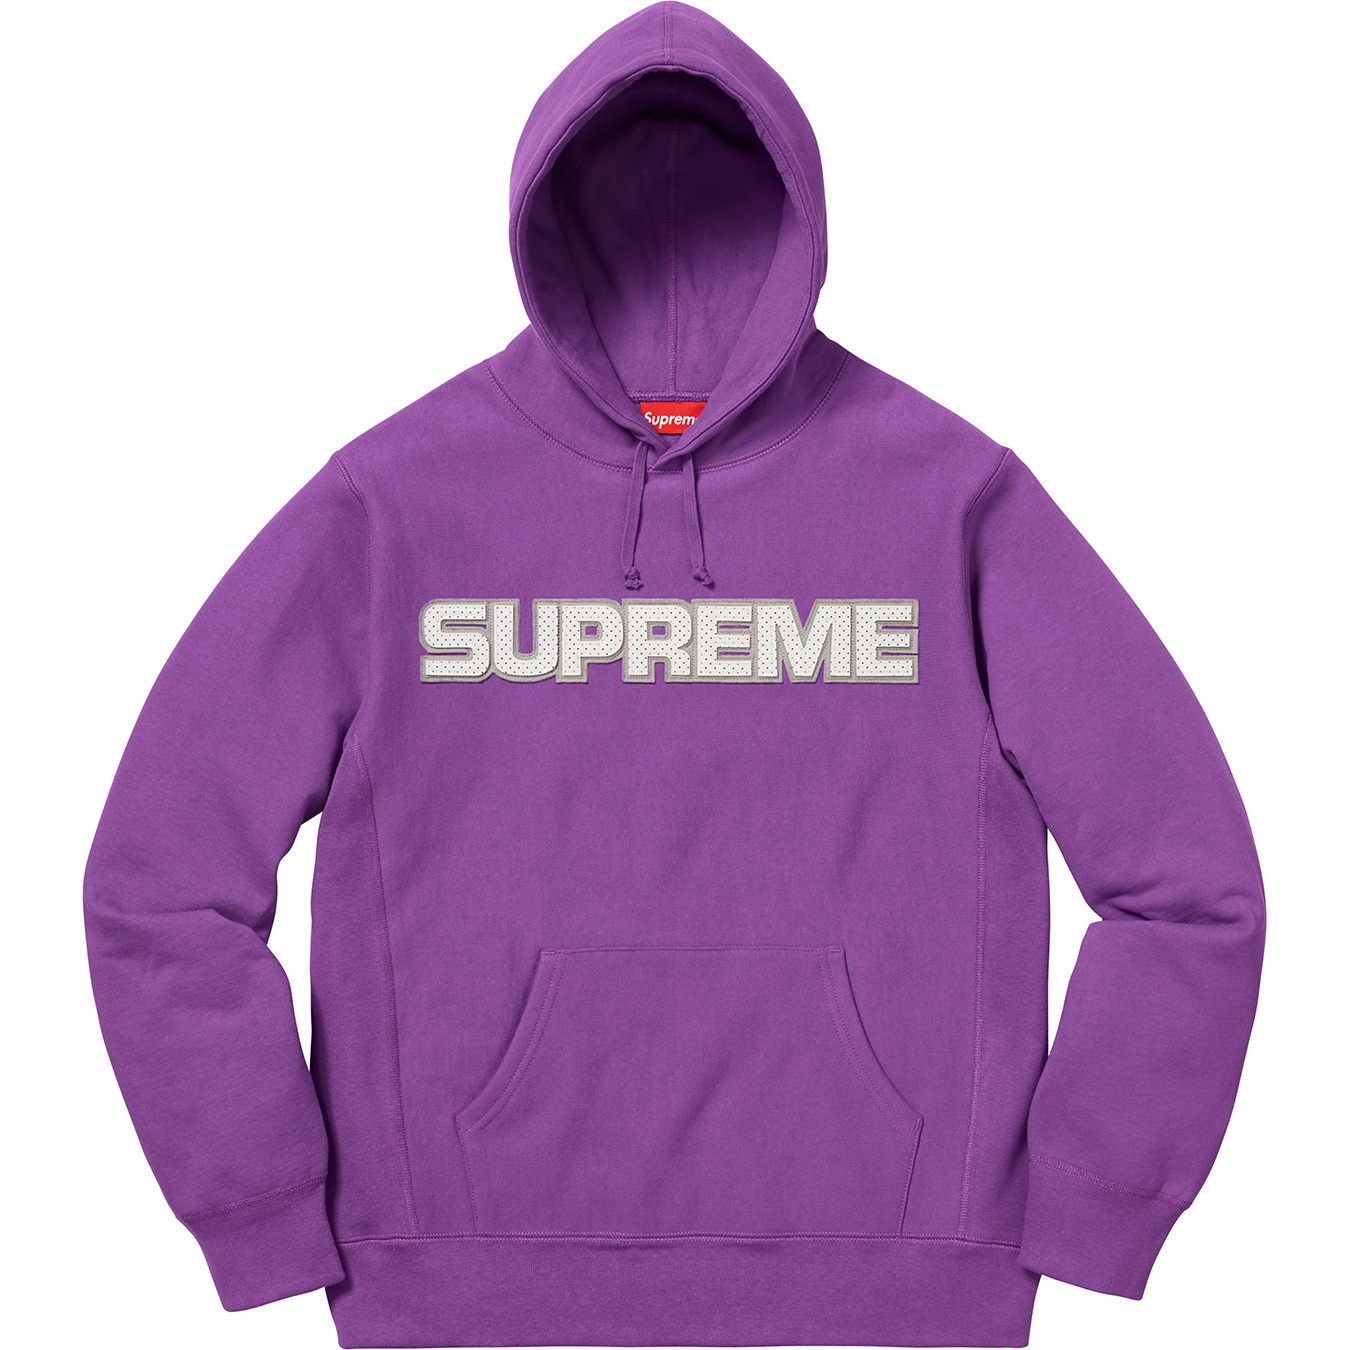 Supreme Perforated Leather Hooded Sweatshirt Violet Men's - FW18 - GB